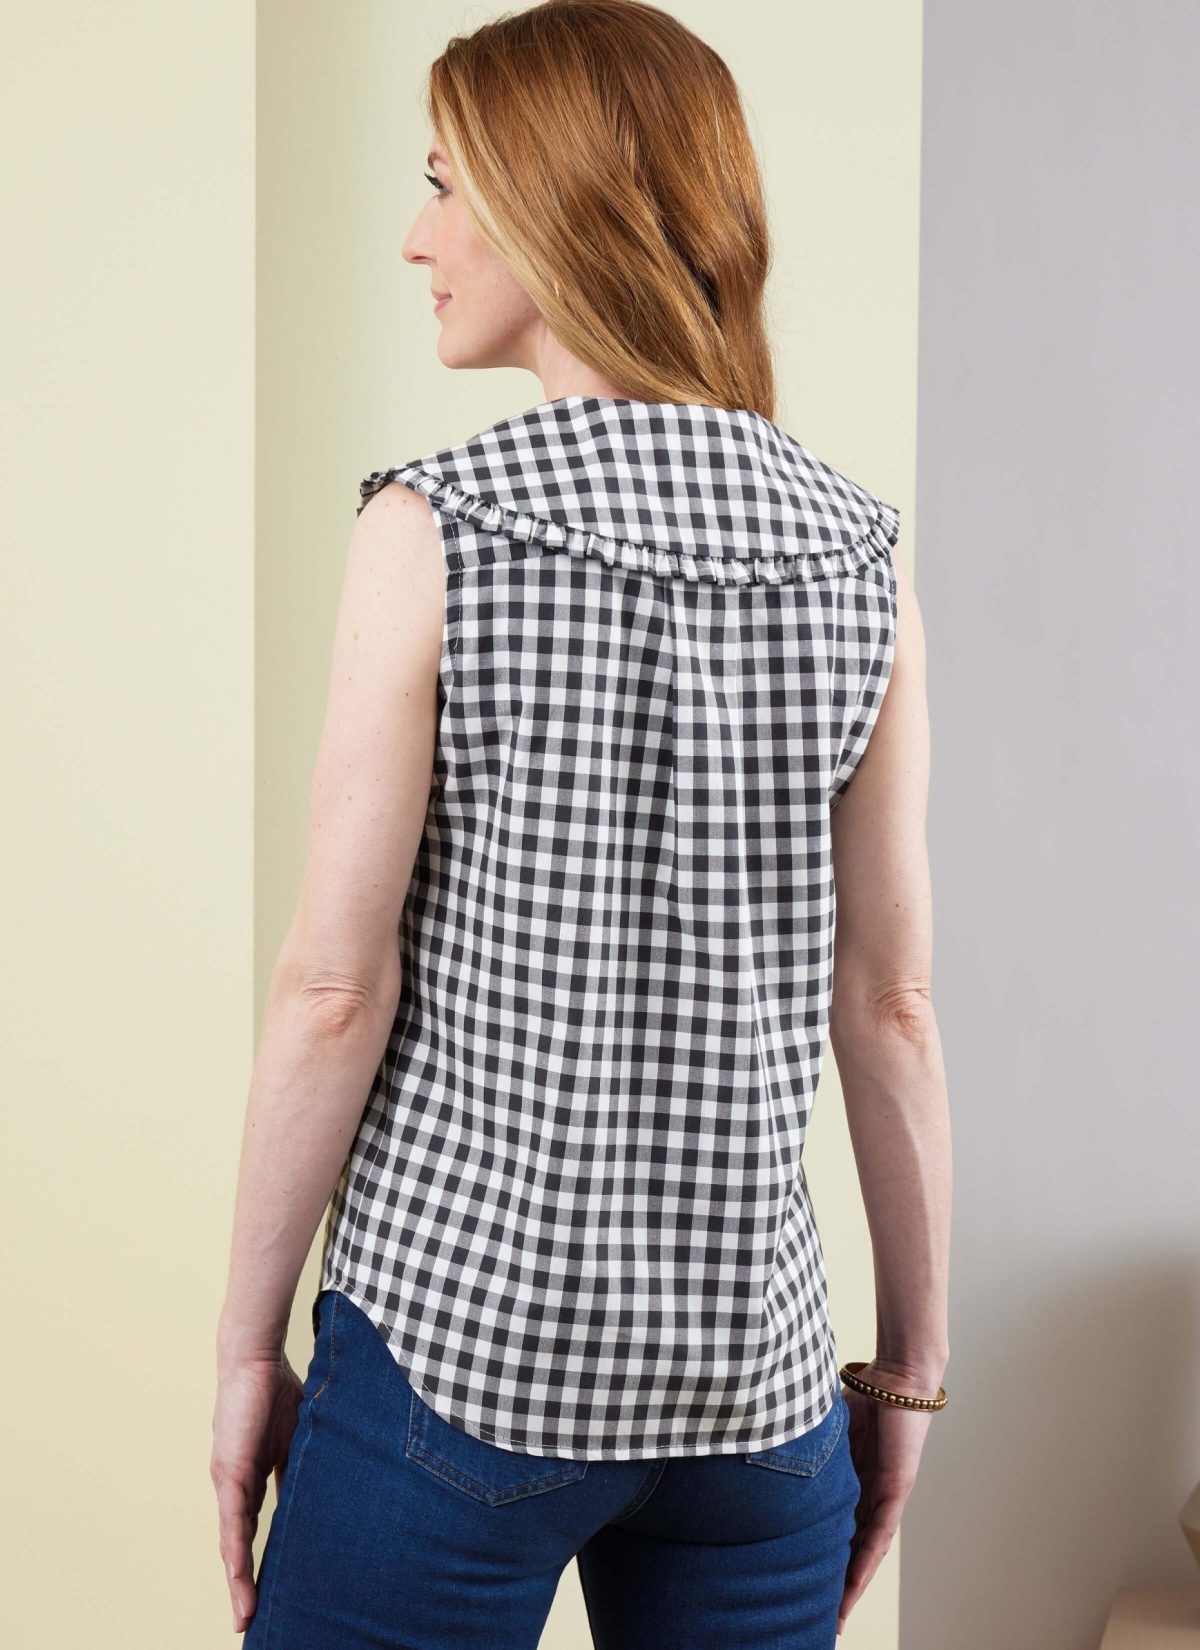 Butterick Sewing Pattern B6895 Misses' Top